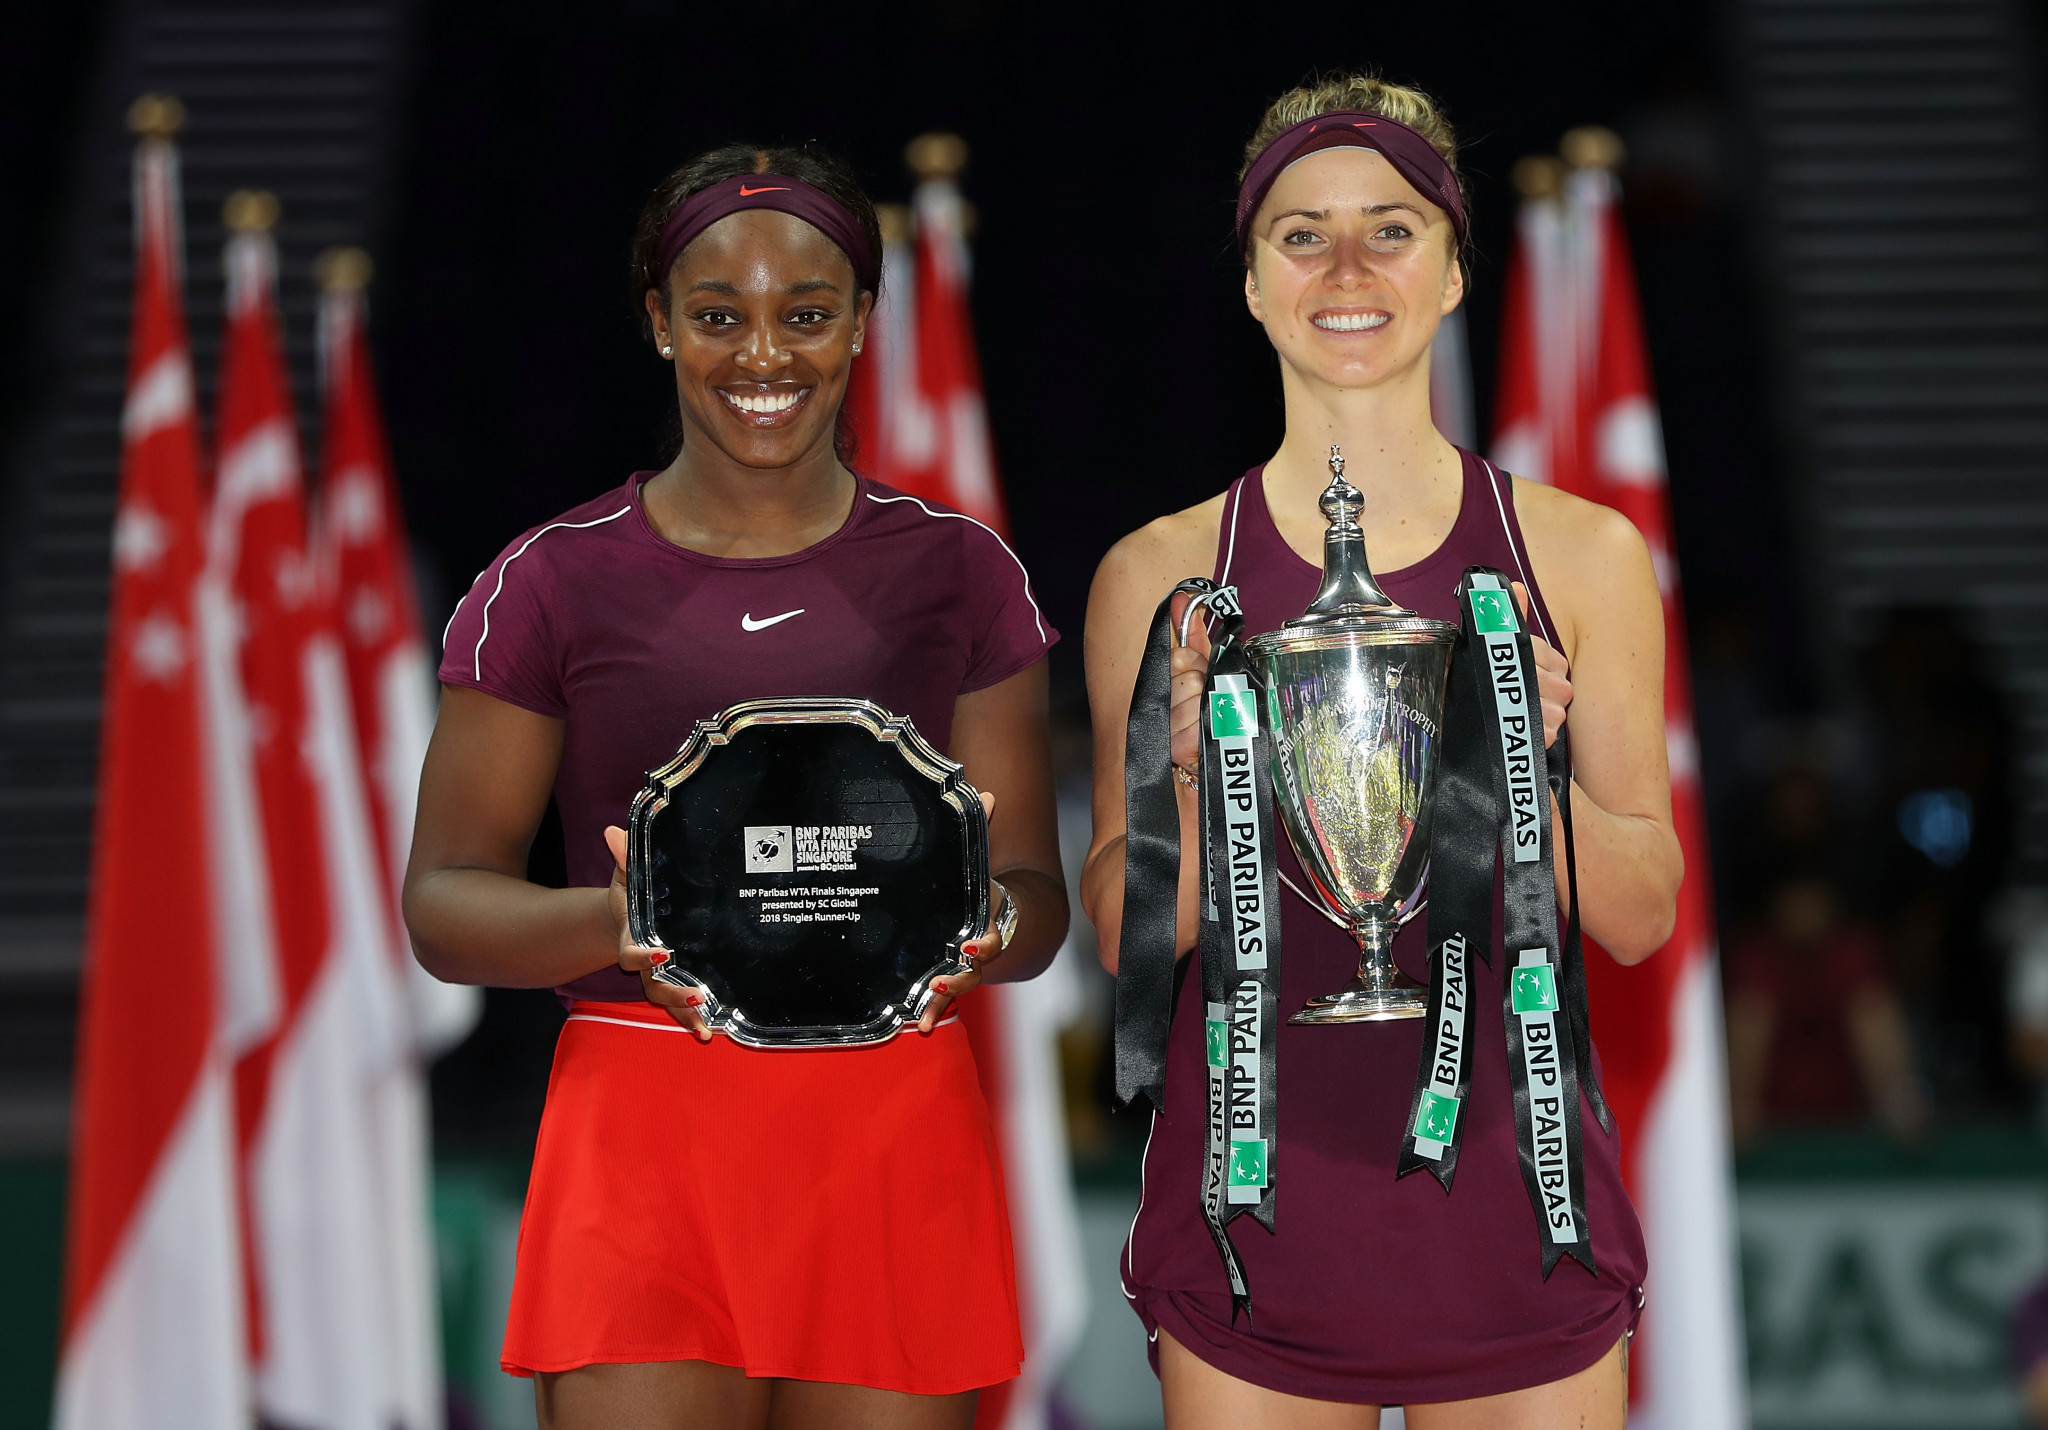 Elina Svitolina of Ukraine, right, won the WTA Finals in Singapore with Sloane Stephens of the United States finishing as runner up ©Getty Images